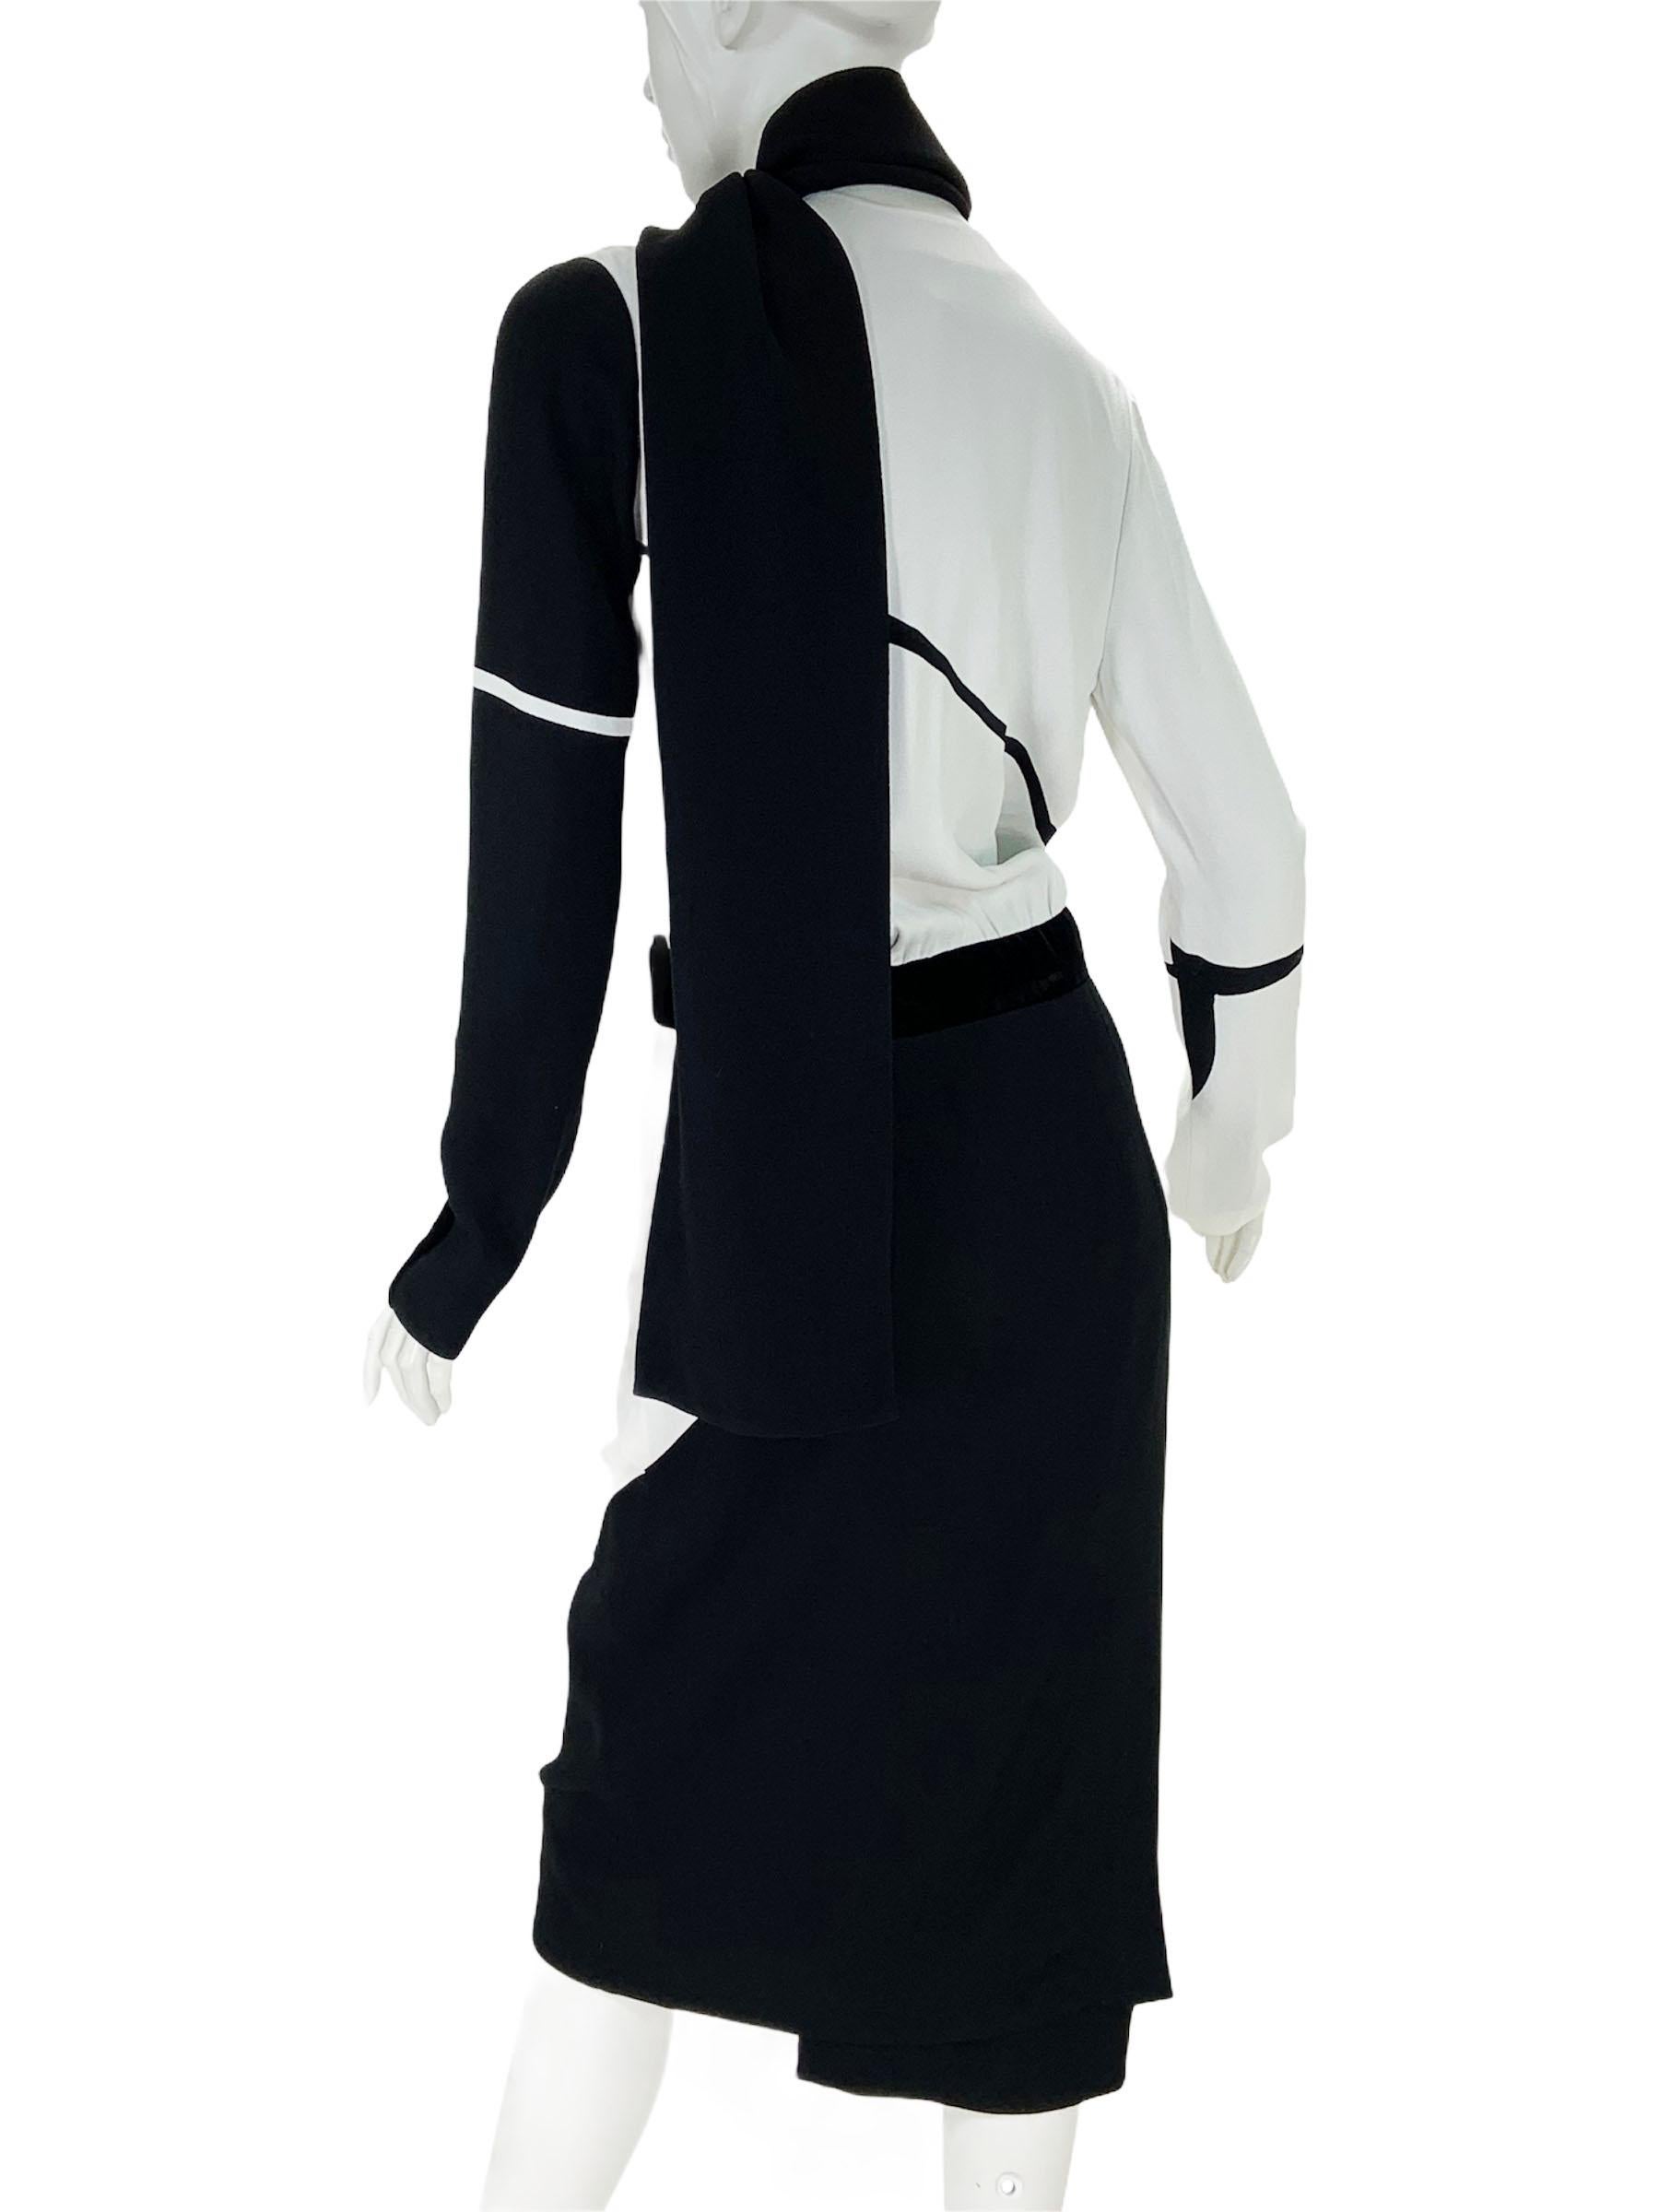 Gray New Tom Ford S/S 2017 Collection White Black Color-Block Cocktail Dress 38 & 40 For Sale